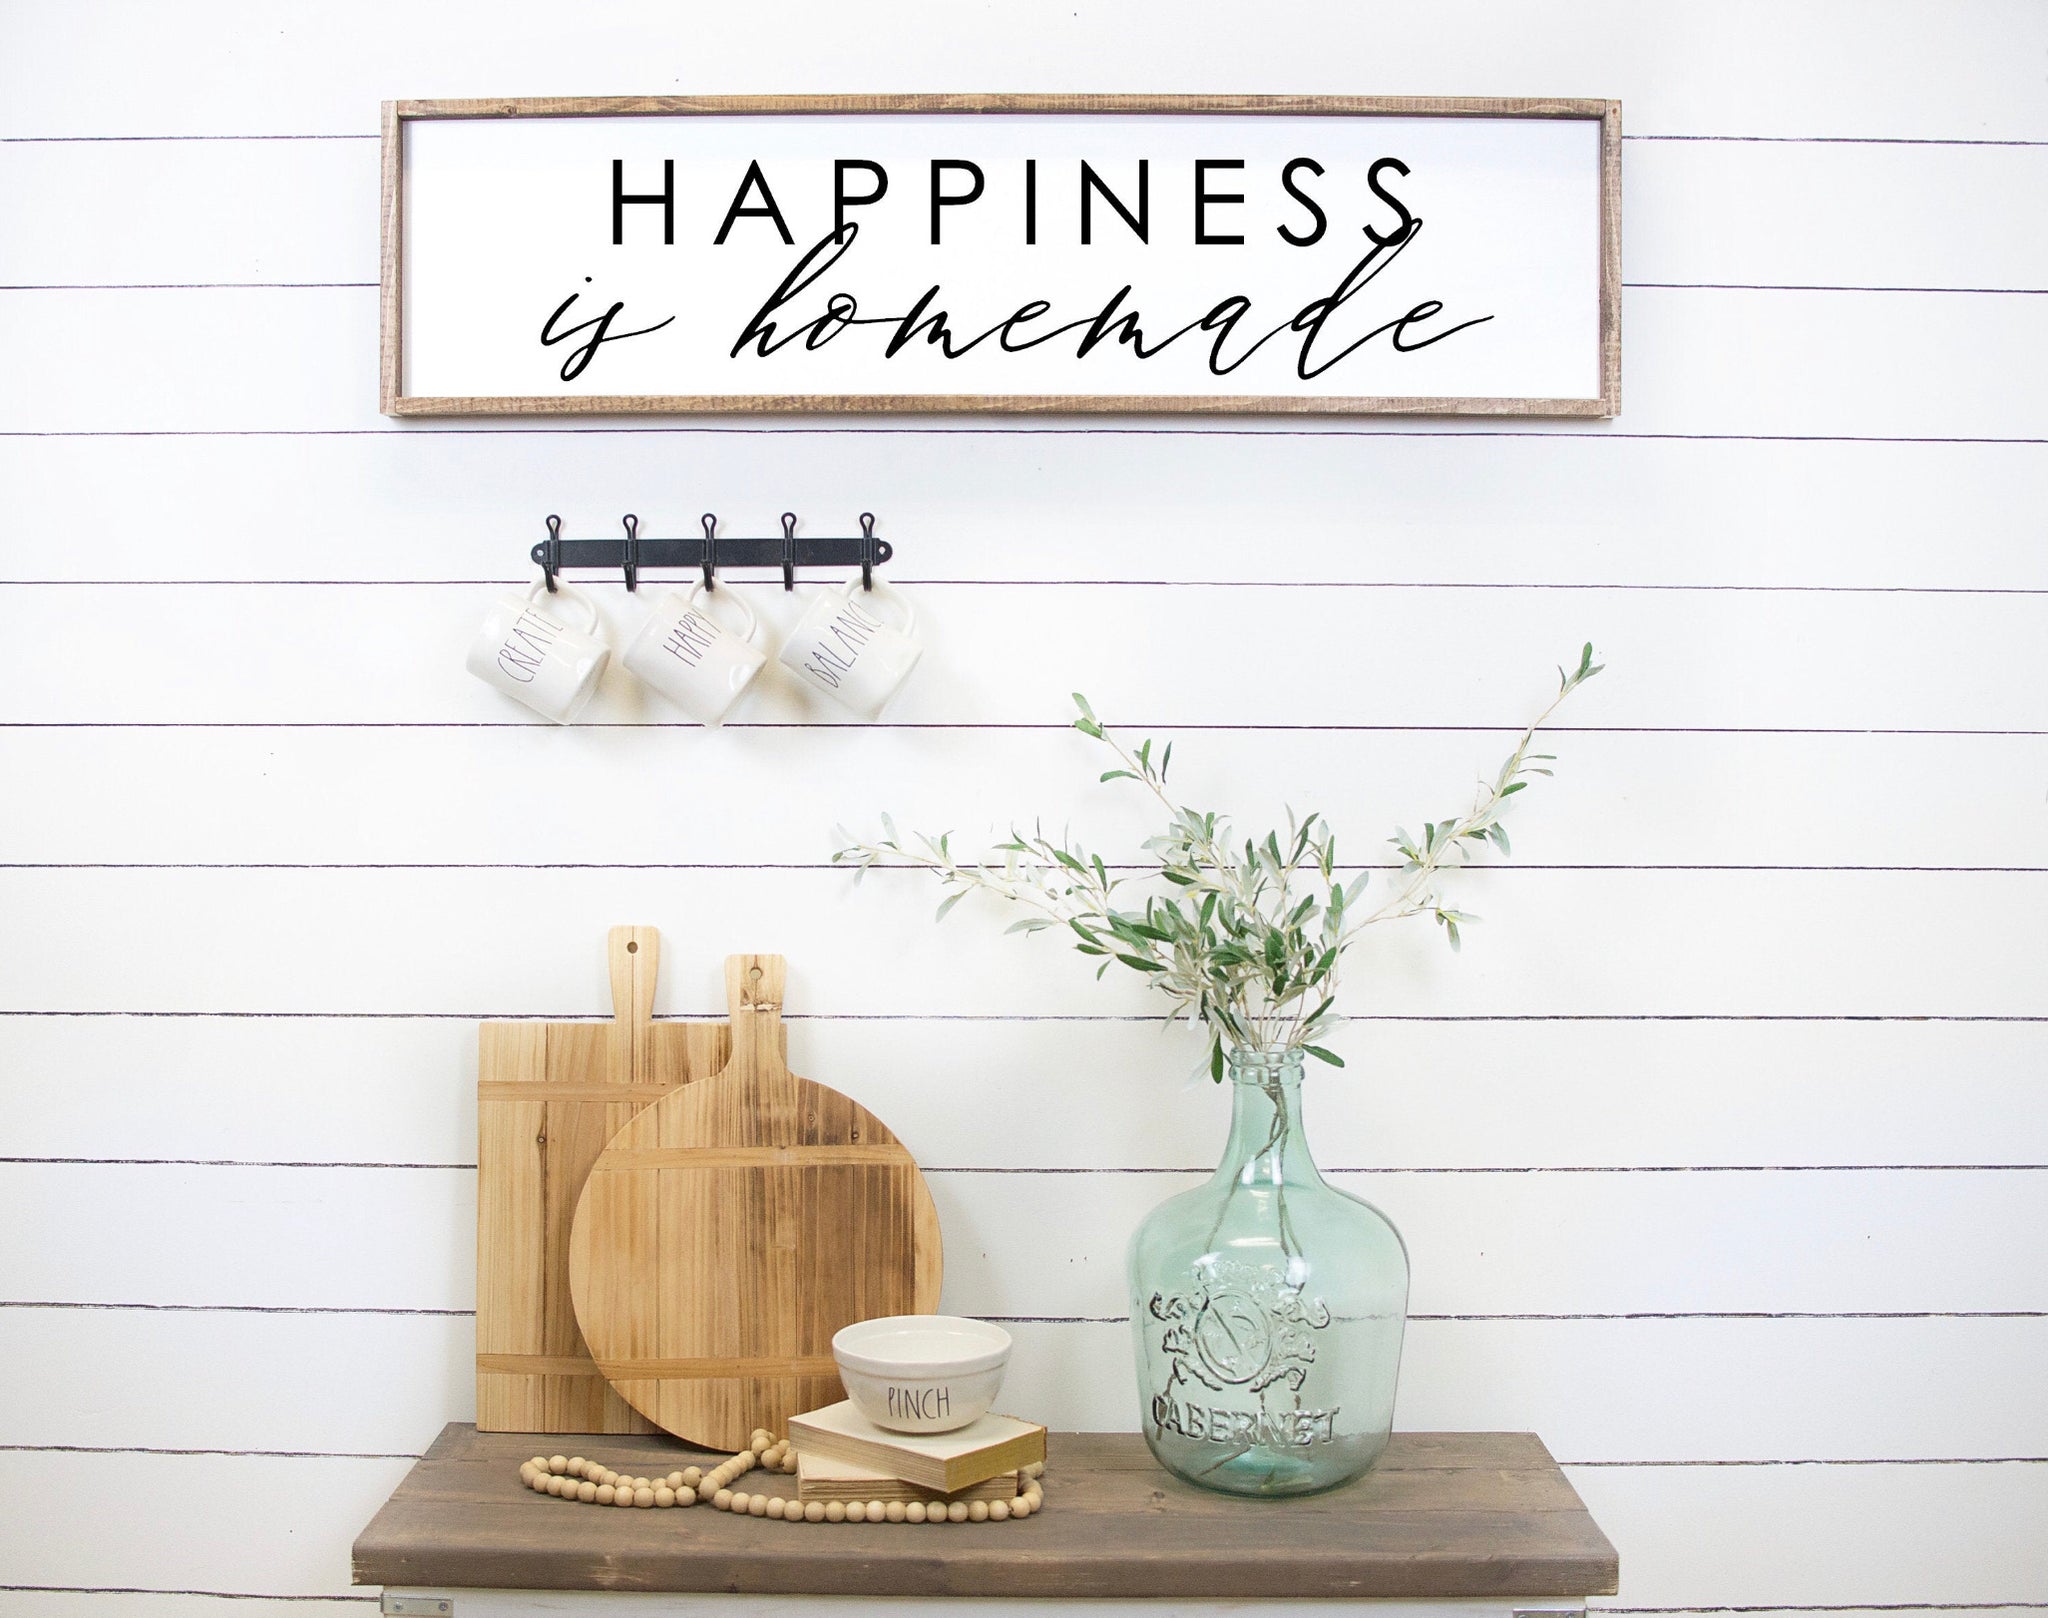 Happiness is Homemade Wood Sign - 30”x9”